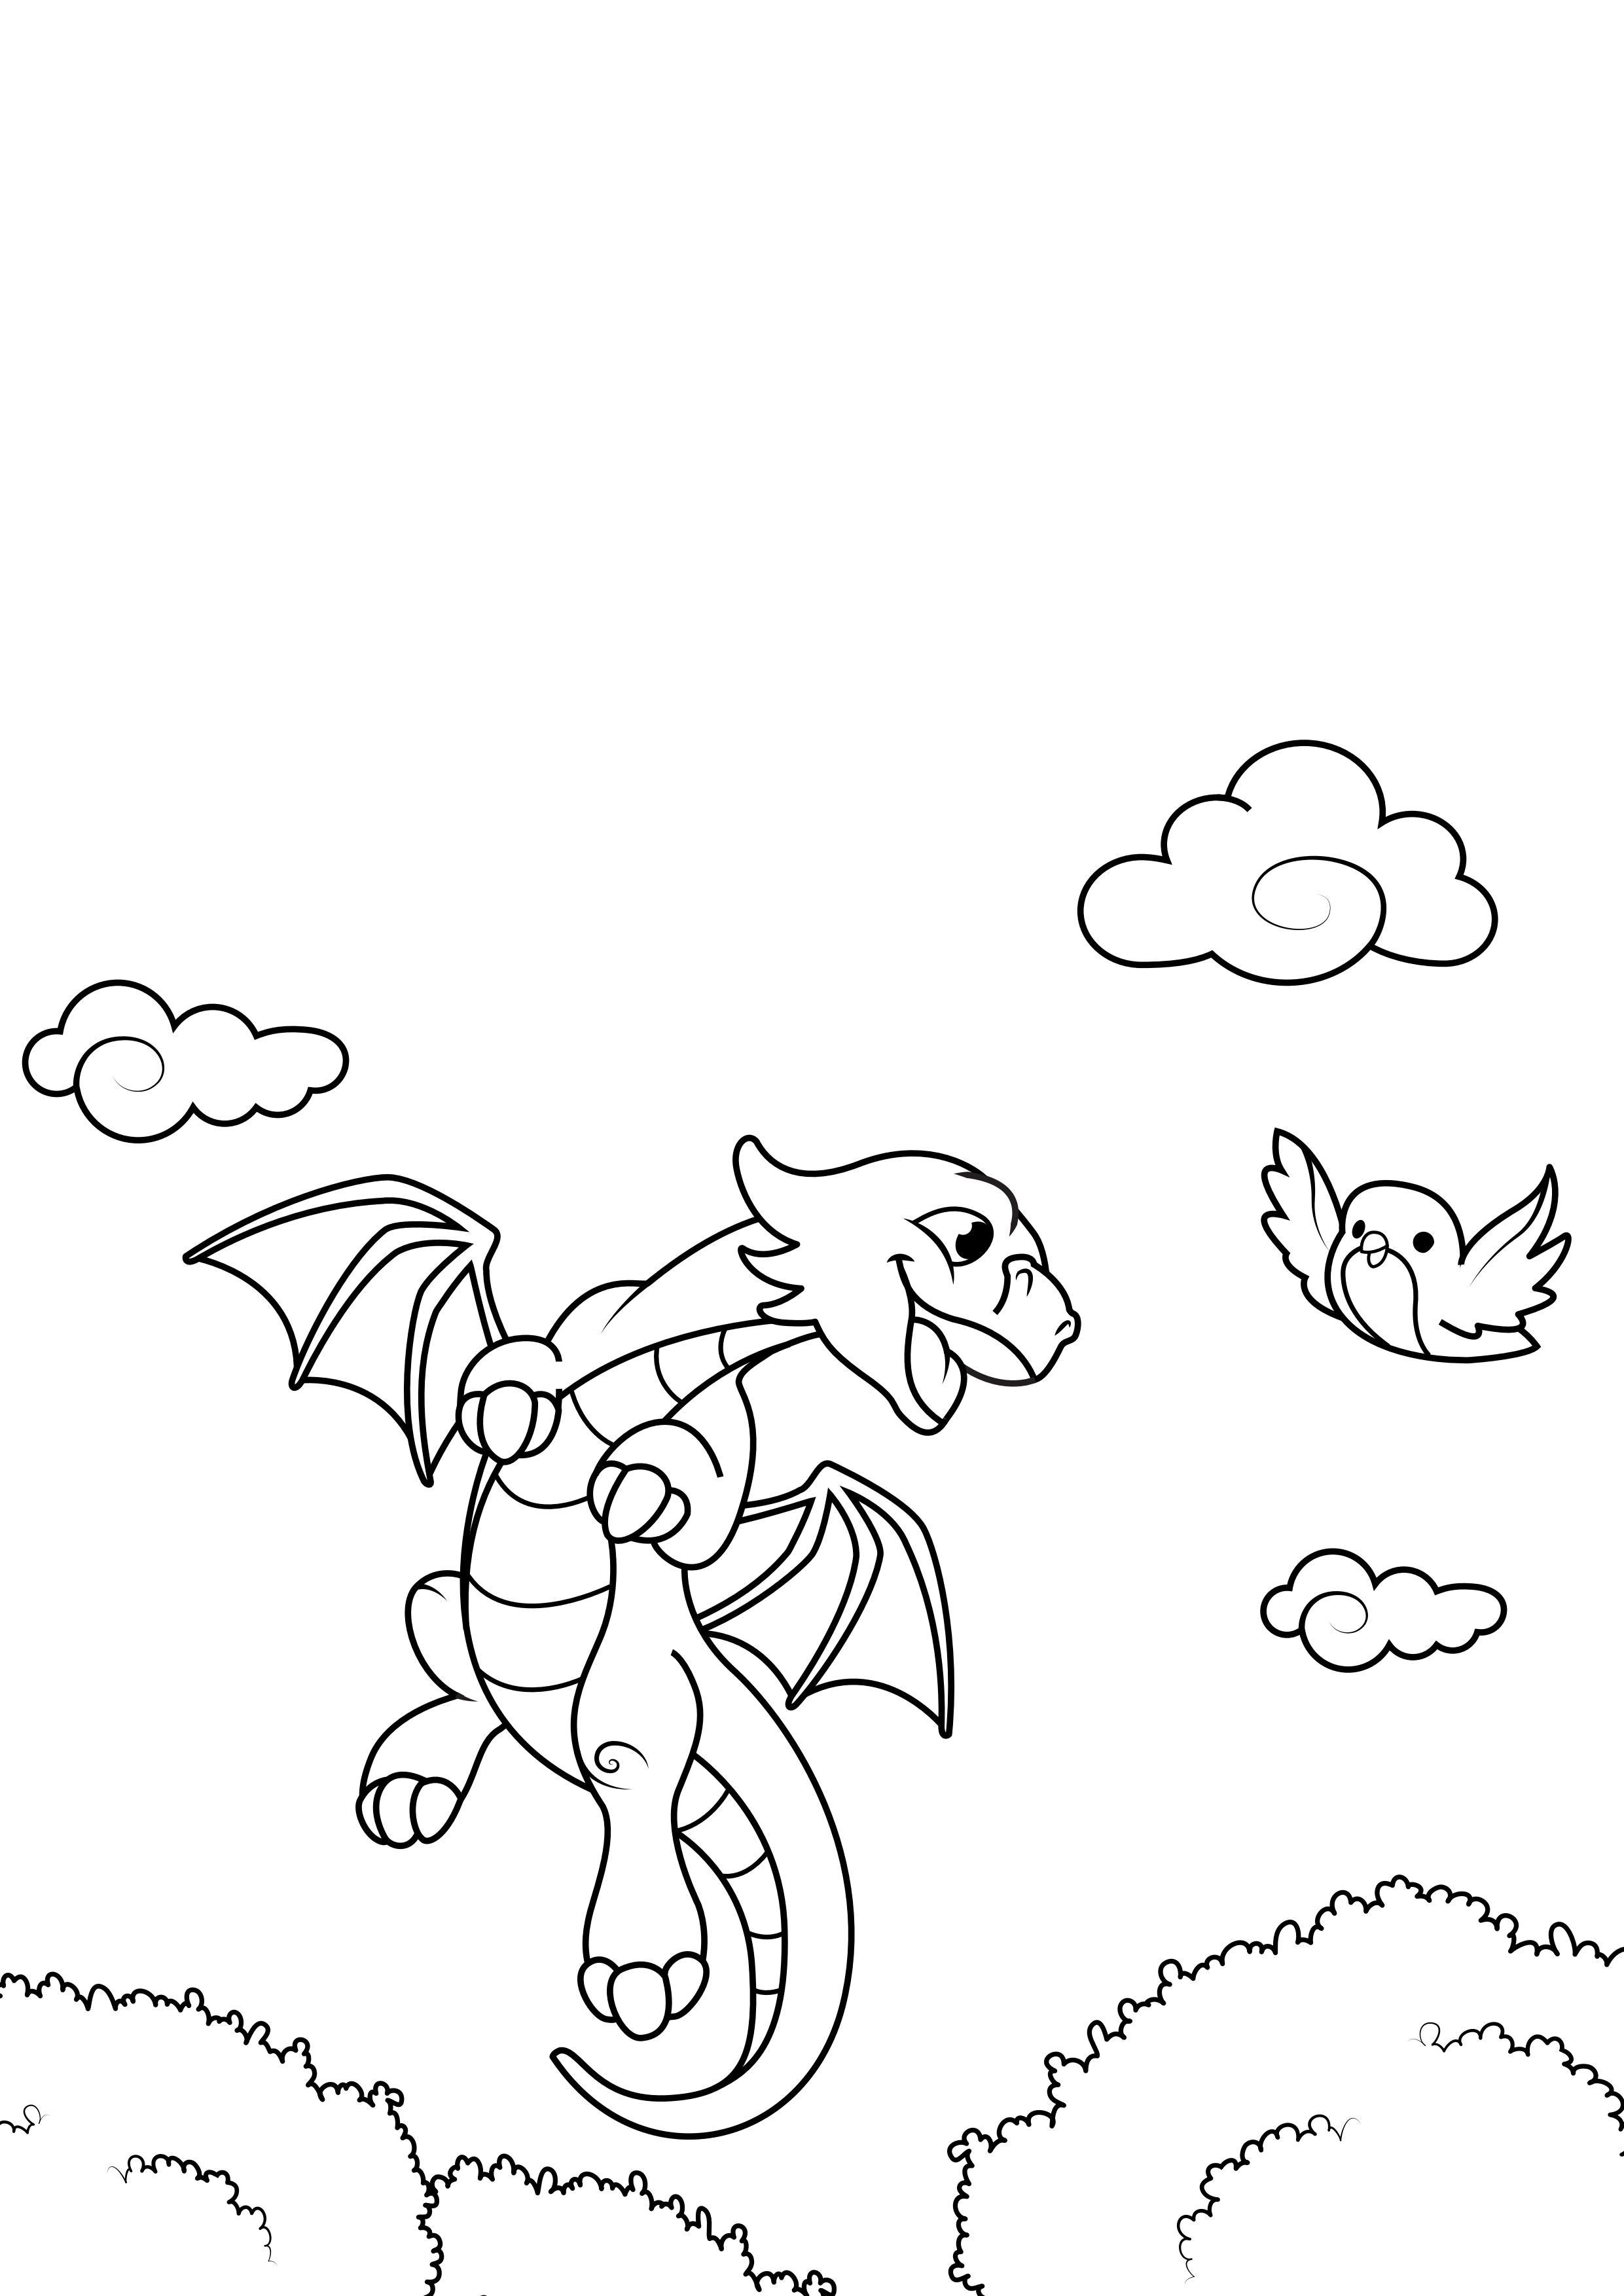 Coloring page dragon flies with bird